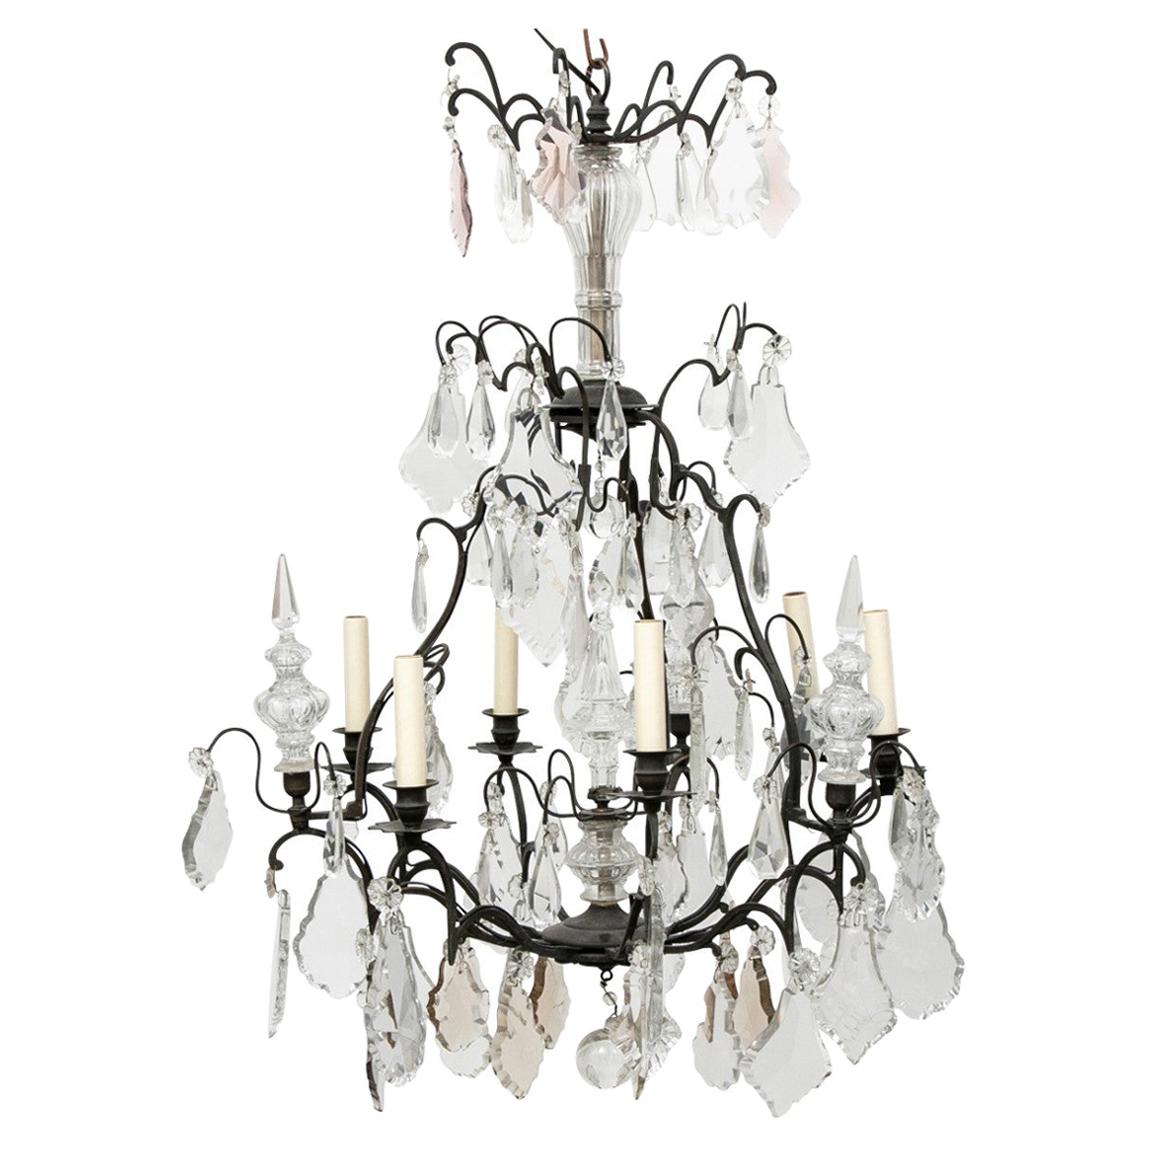 Large Classic French Crystal Chandelier with 6 Lights